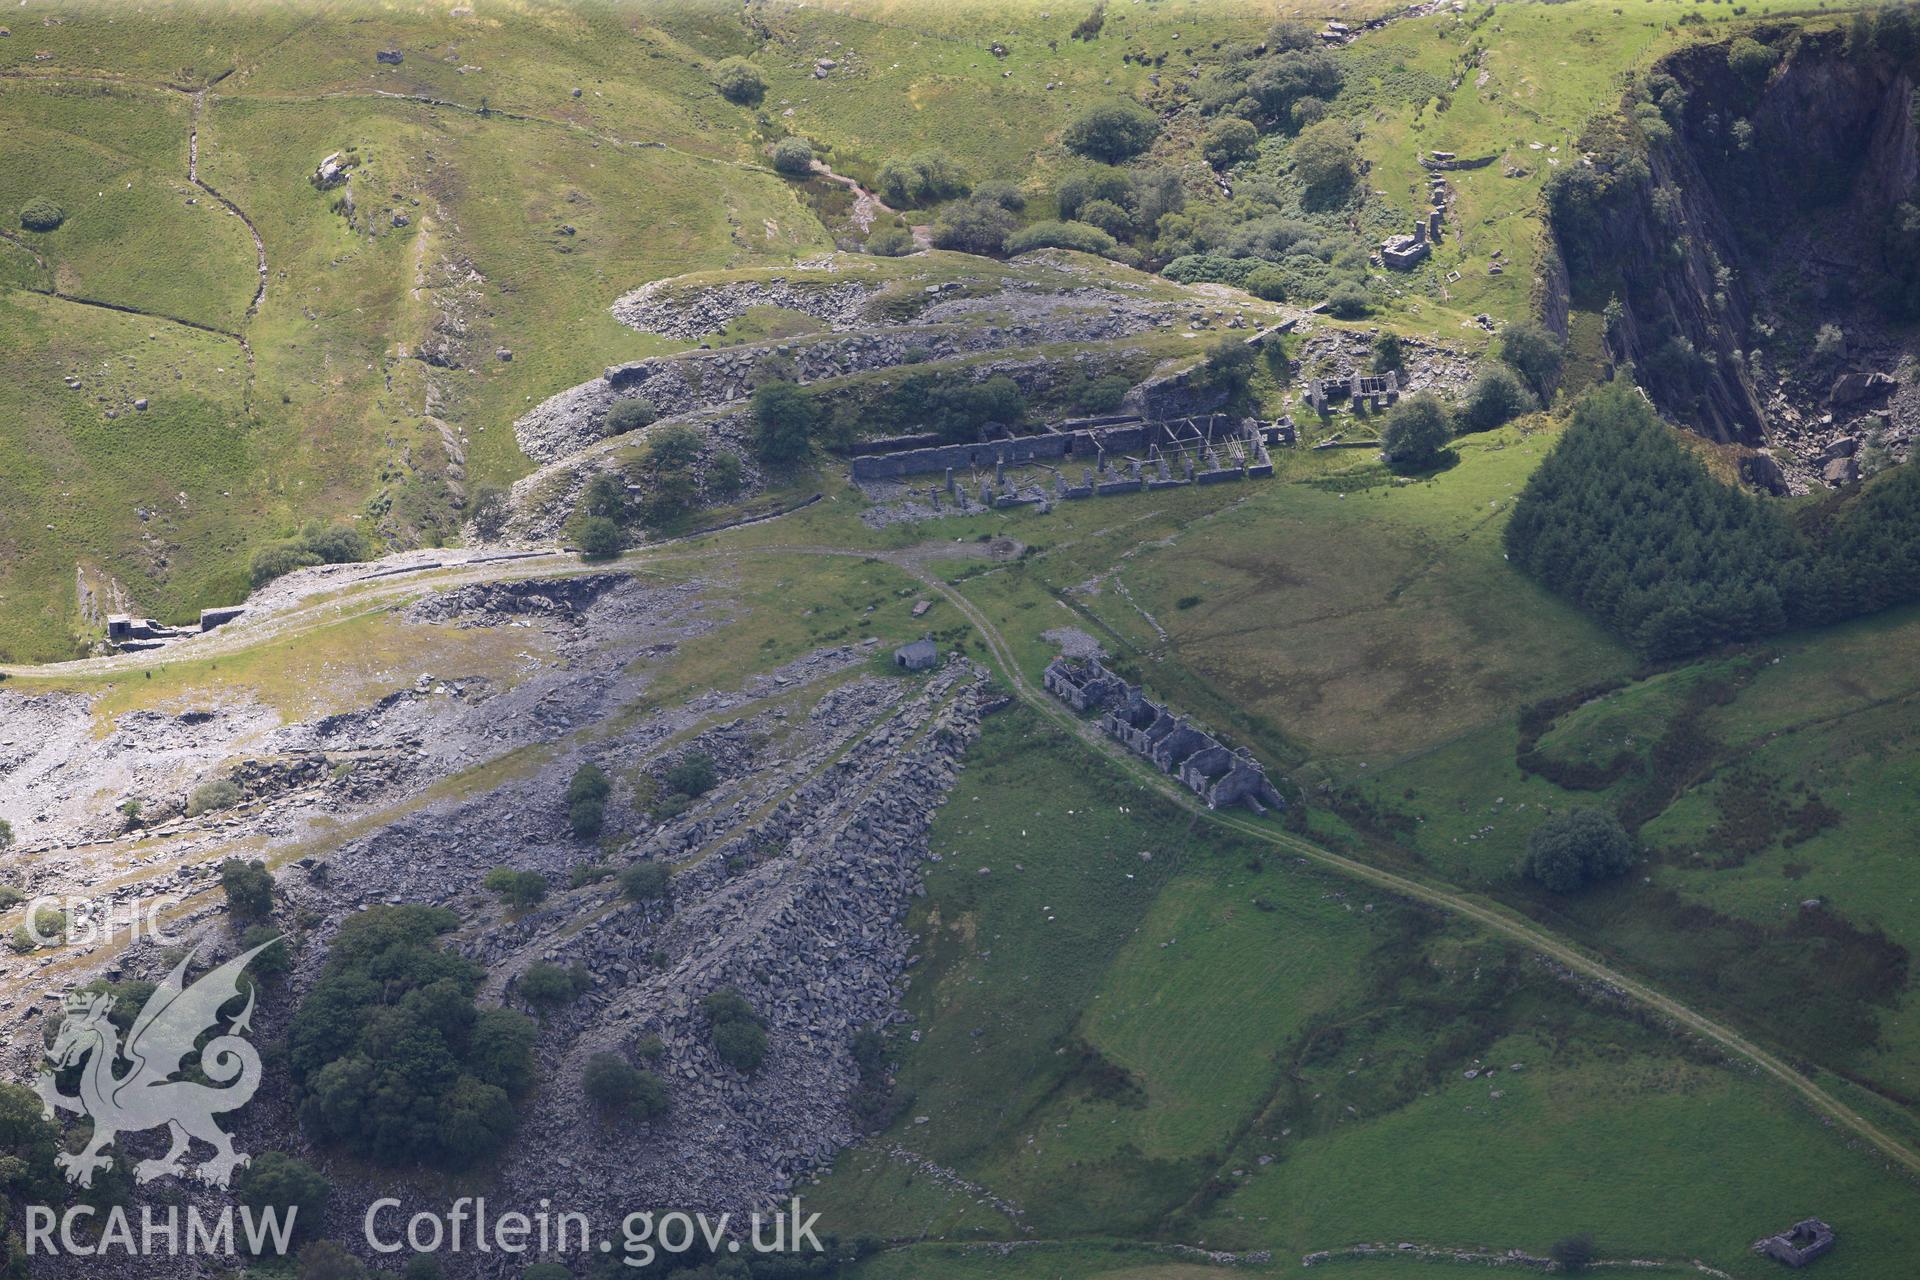 RCAHMW colour oblique photograph of Rhos Quarry, Capel Curig, viewed from the west. Taken by Toby Driver on 10/08/2012.